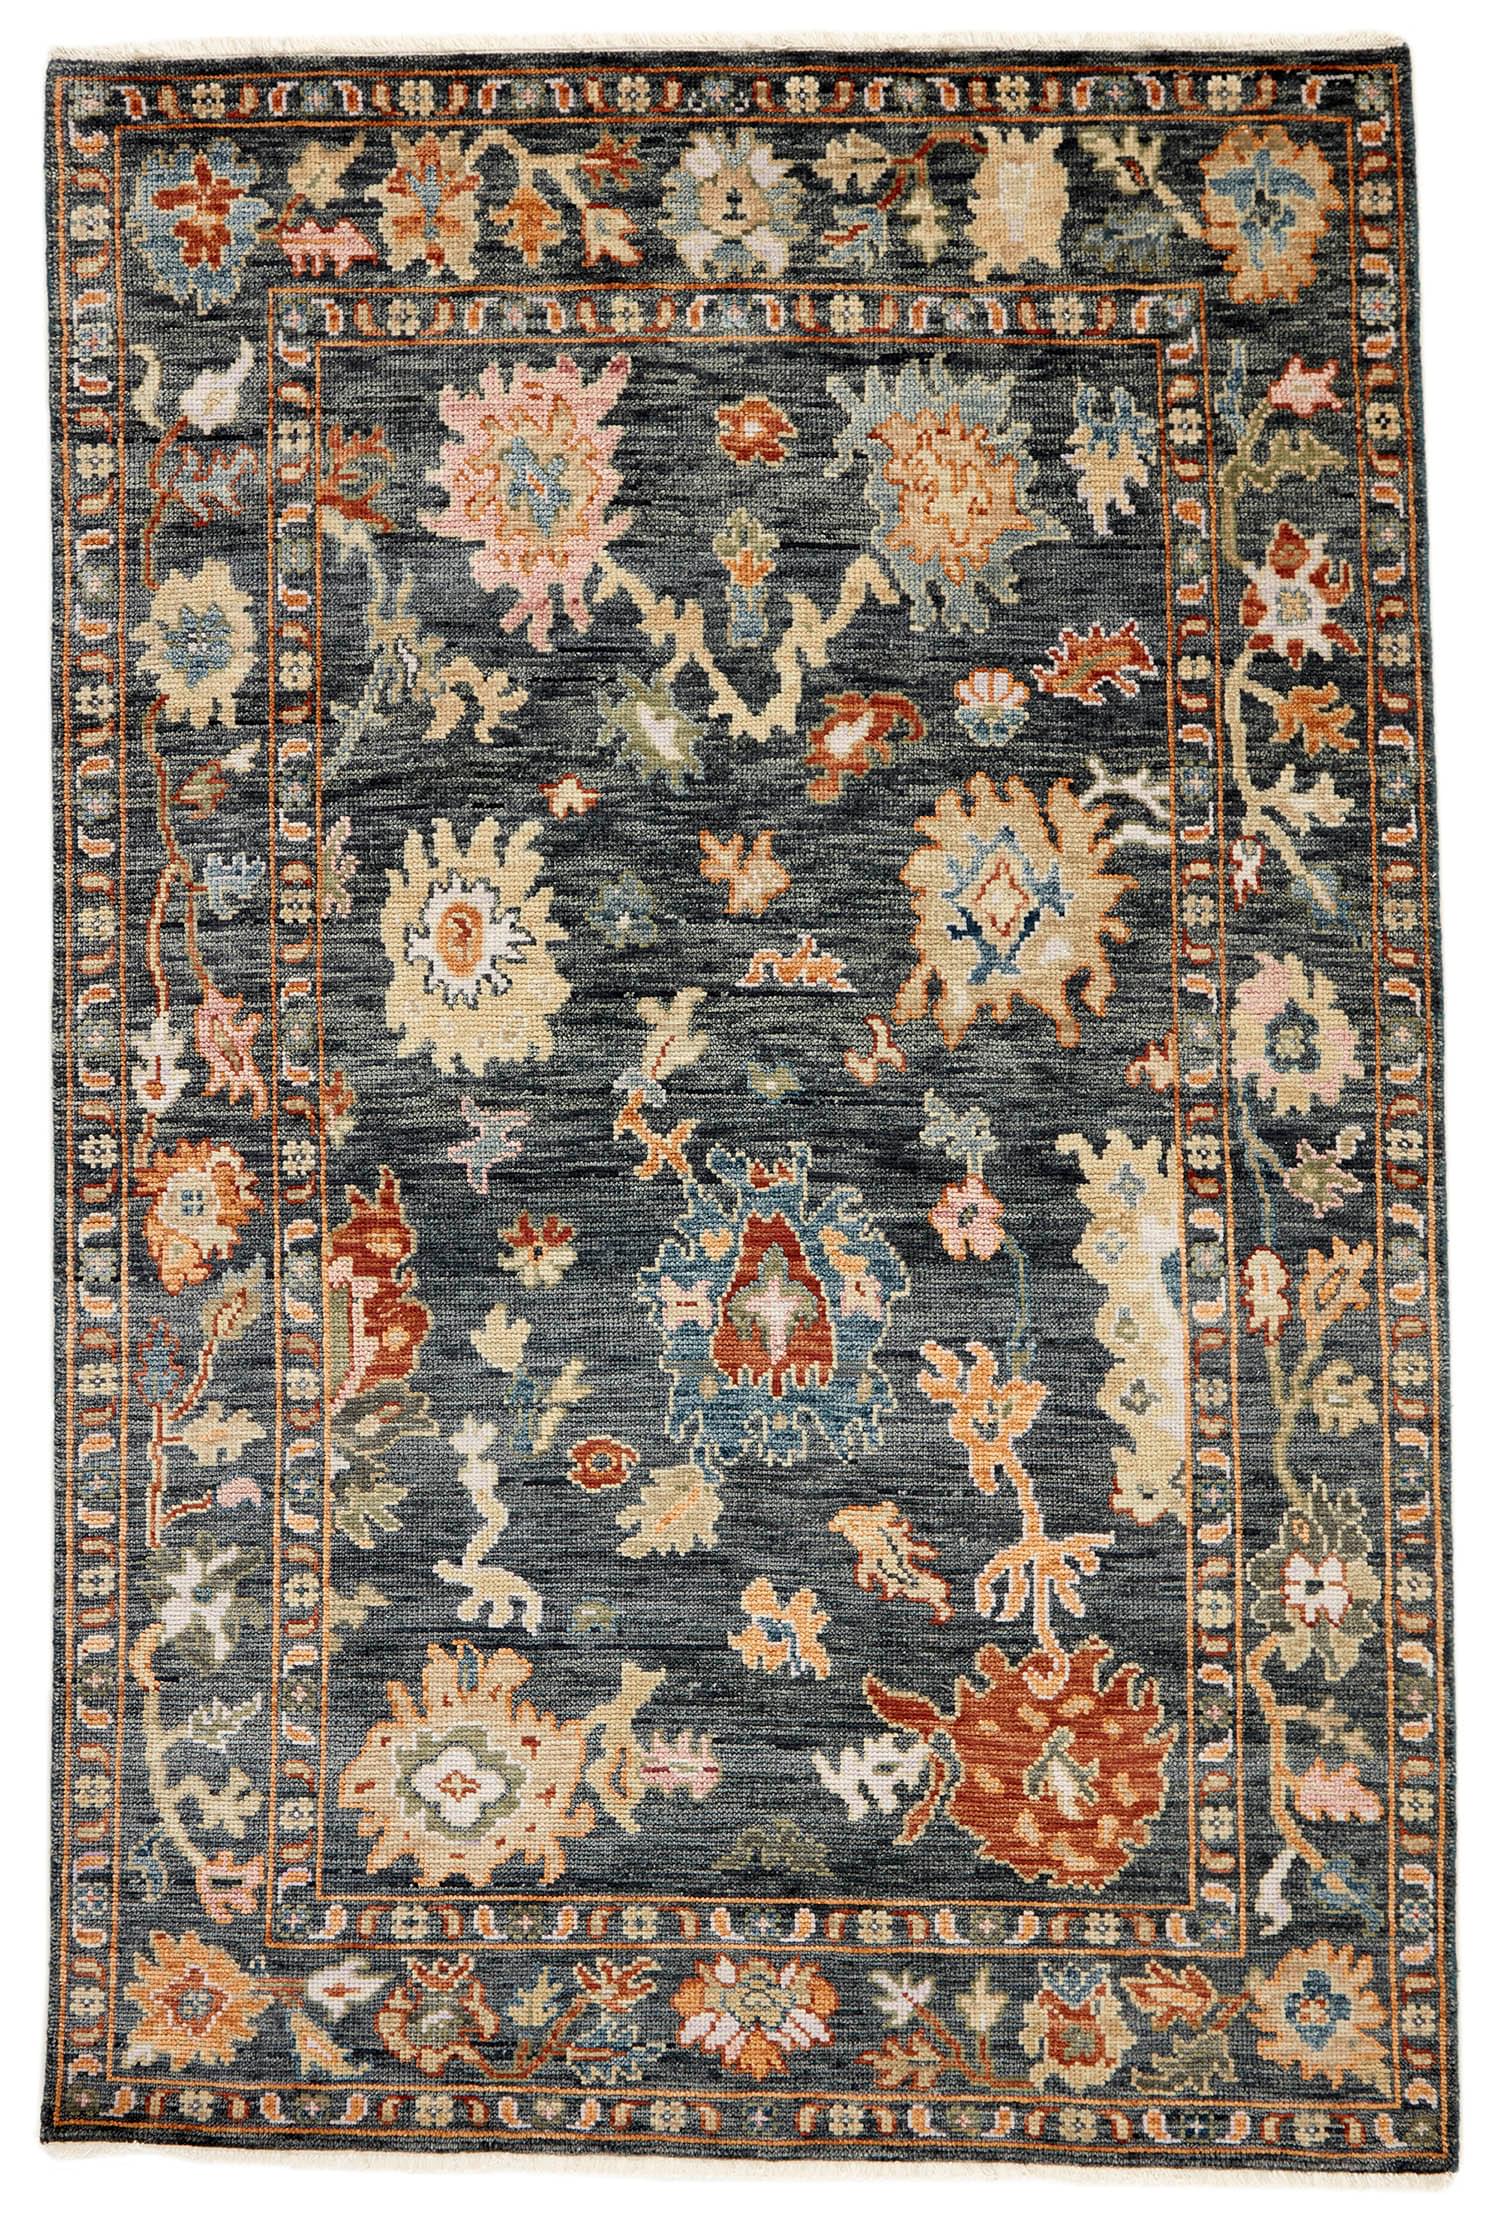 authentic Oriental rug with traditional motifs in red, pink, blue, green, beige, brown and black